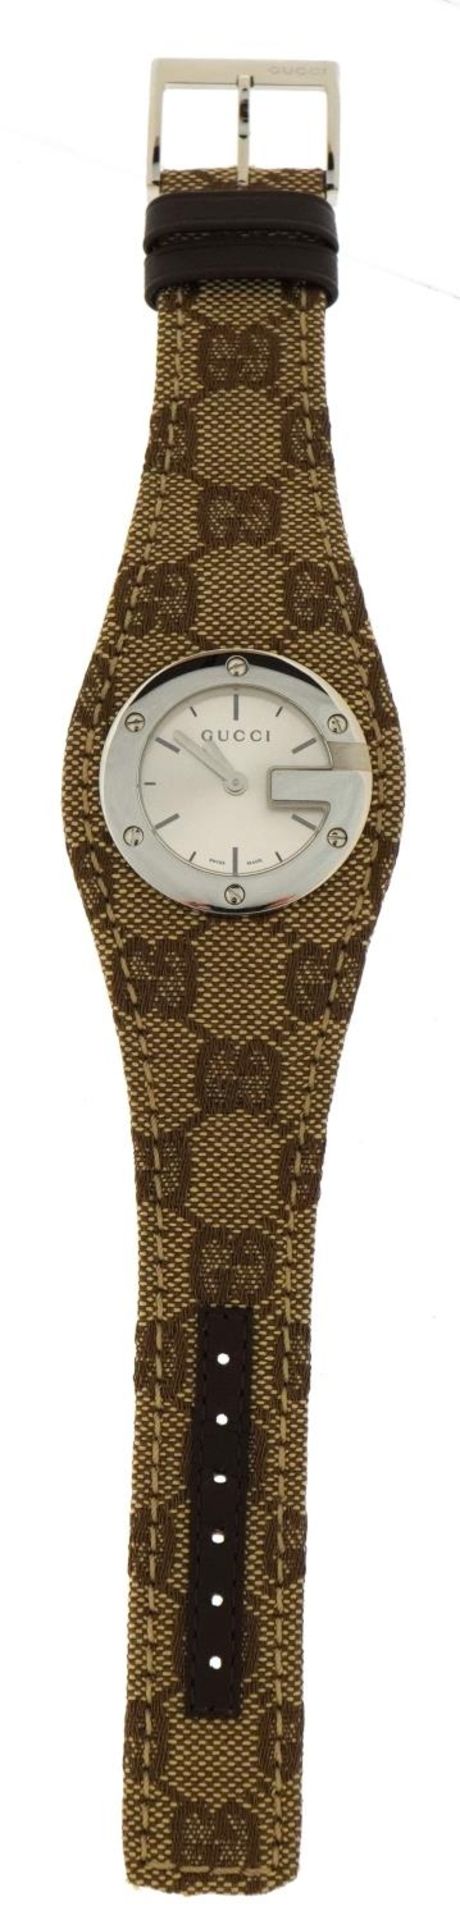 Gucci, ladies Gucci Bandeau wristwatch numbered 104 with Gucci box, overall 38mm wide - Image 2 of 6